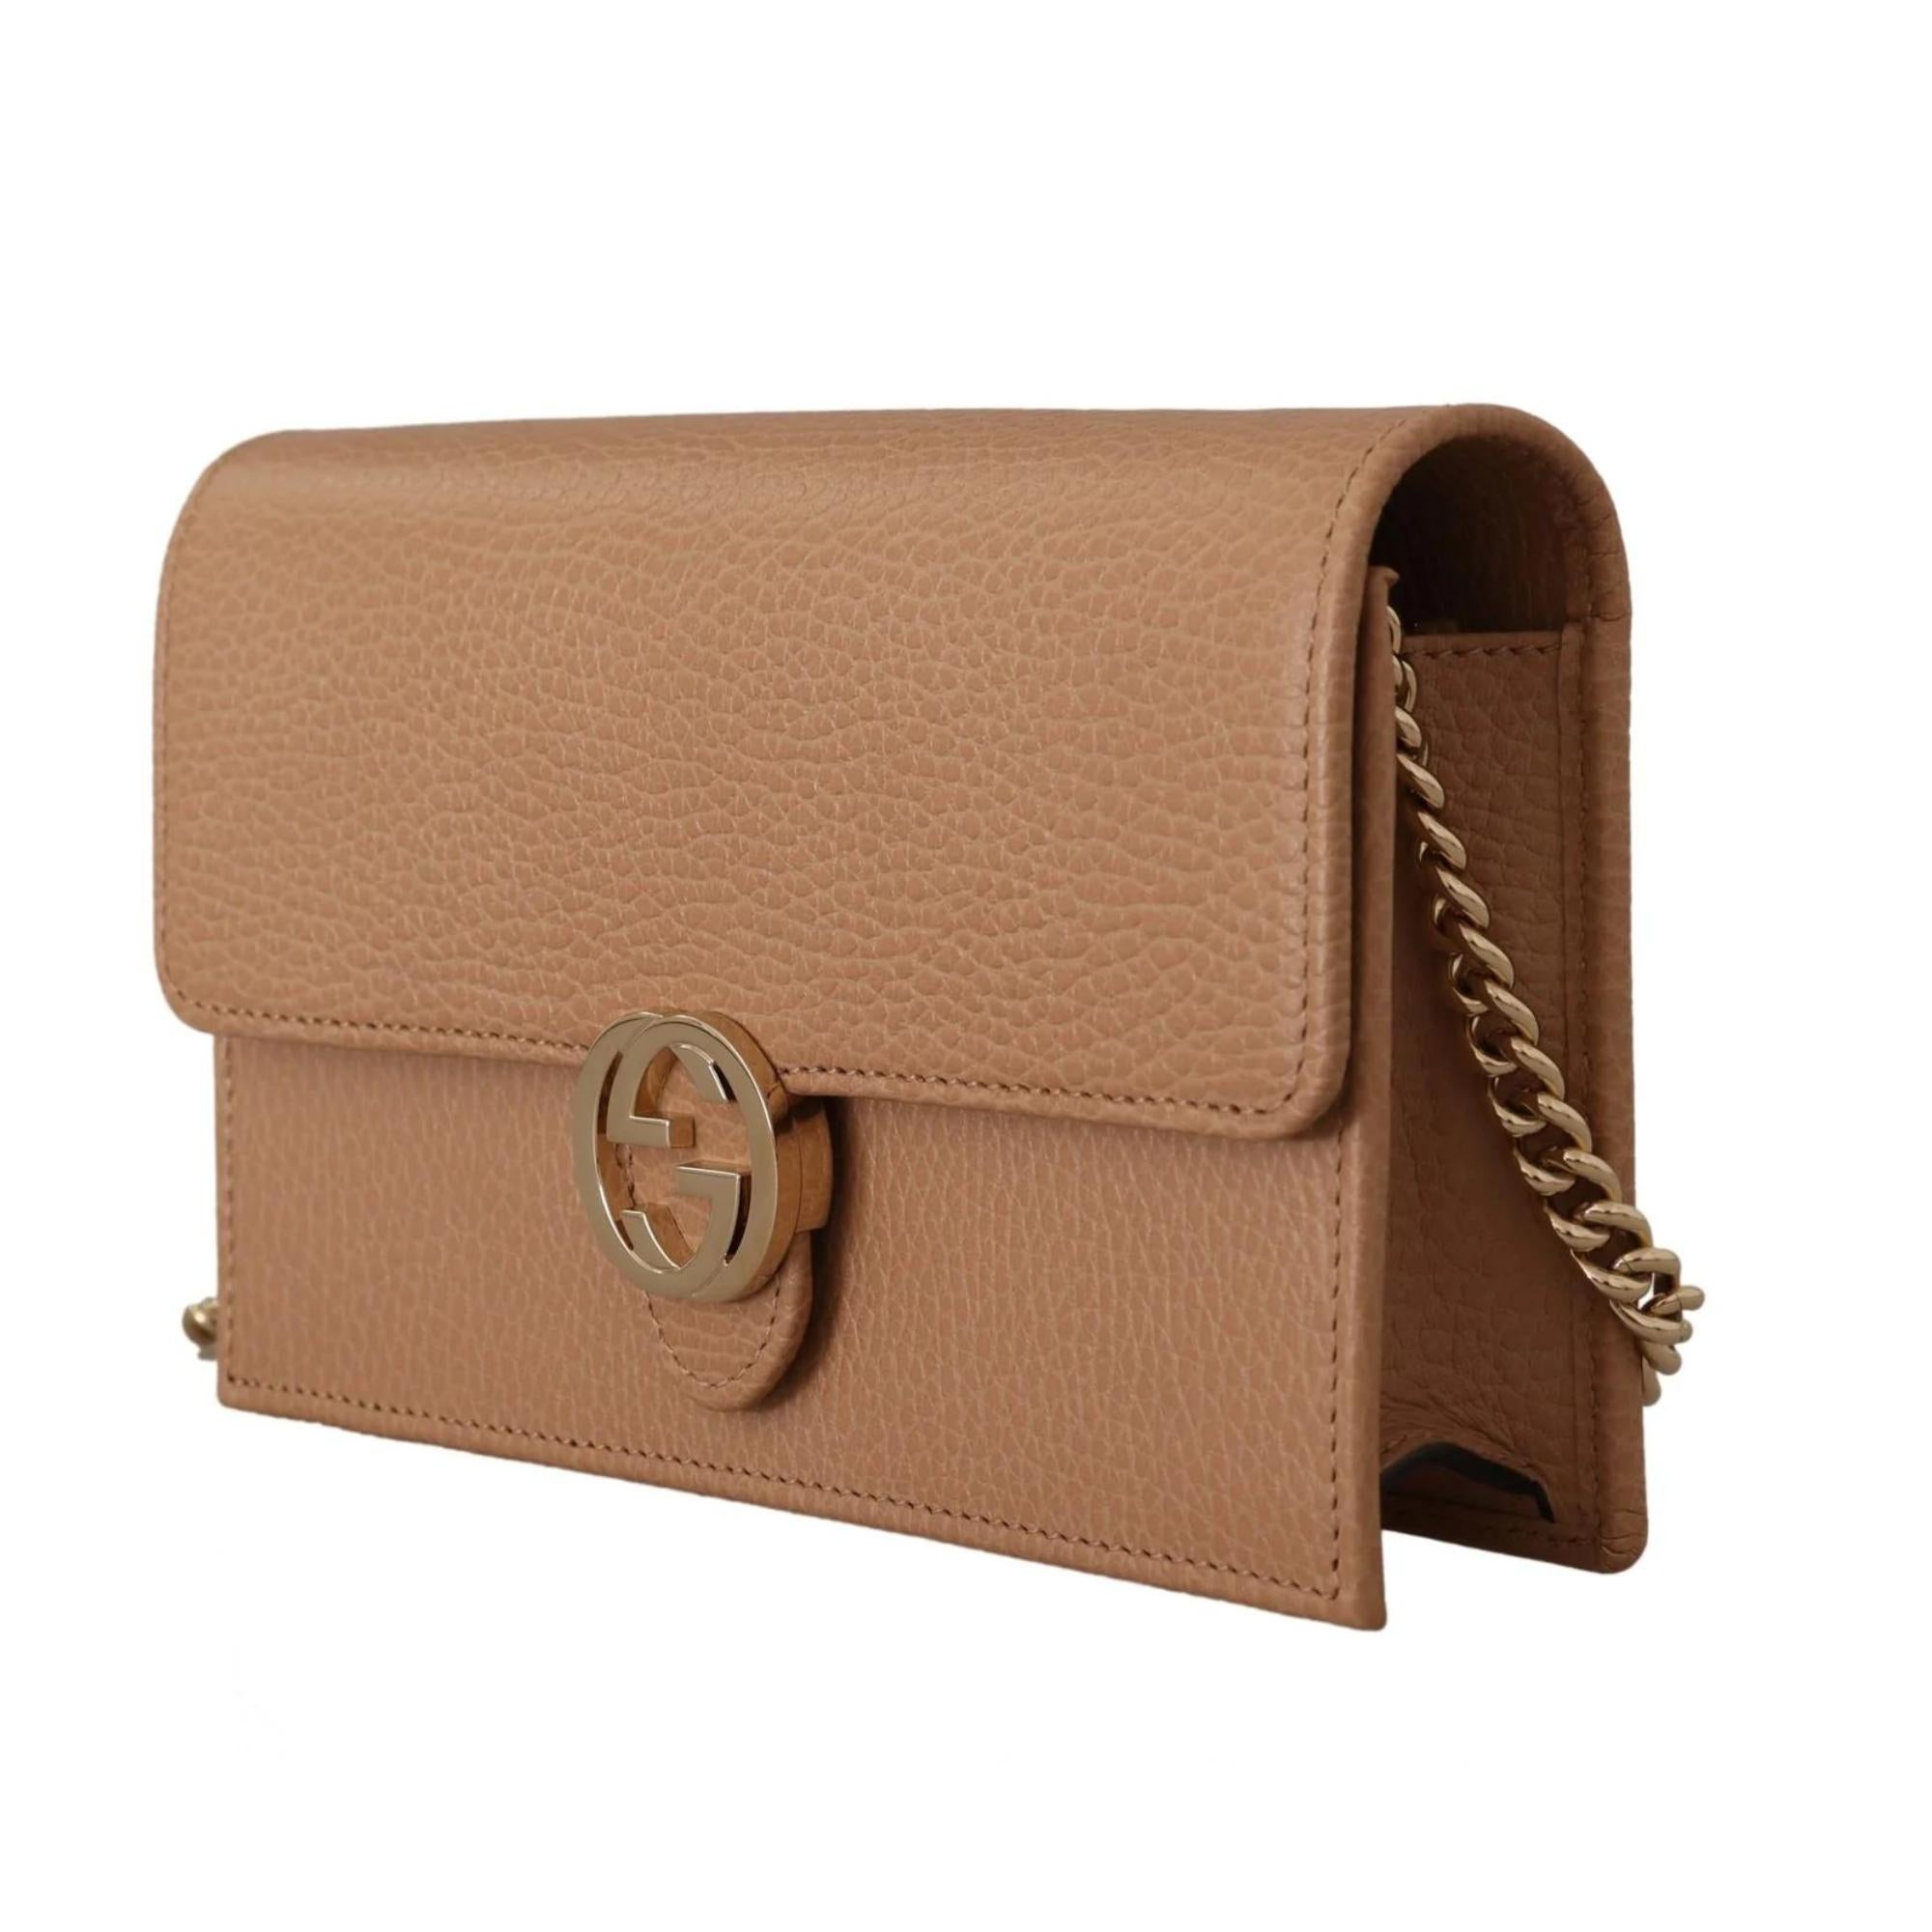 This shoulder bag is made of textured calfskin leather in a beige. This bag features a long polished gold chain shoulder strap and a Gucci GG logo on the front flap. The flap opens to a partitioned interior with matching leather and fabric in beige.